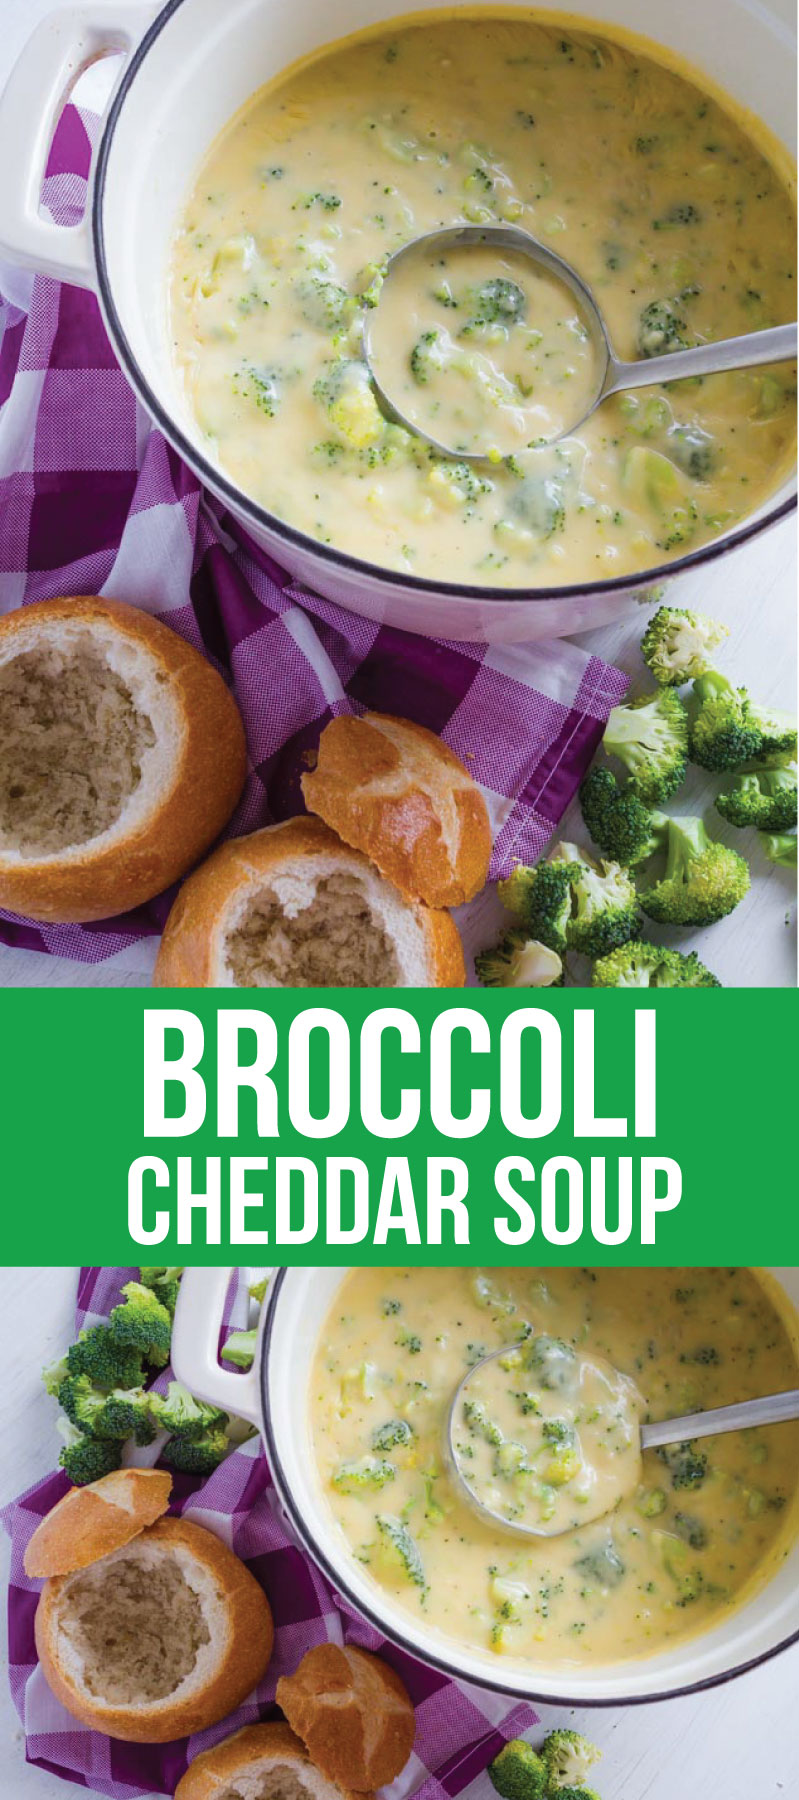 Food: Broccoli Cheddar Soup - a delicious recipe to try out that will warm you right up! via www.thirtyhandmadedays.com